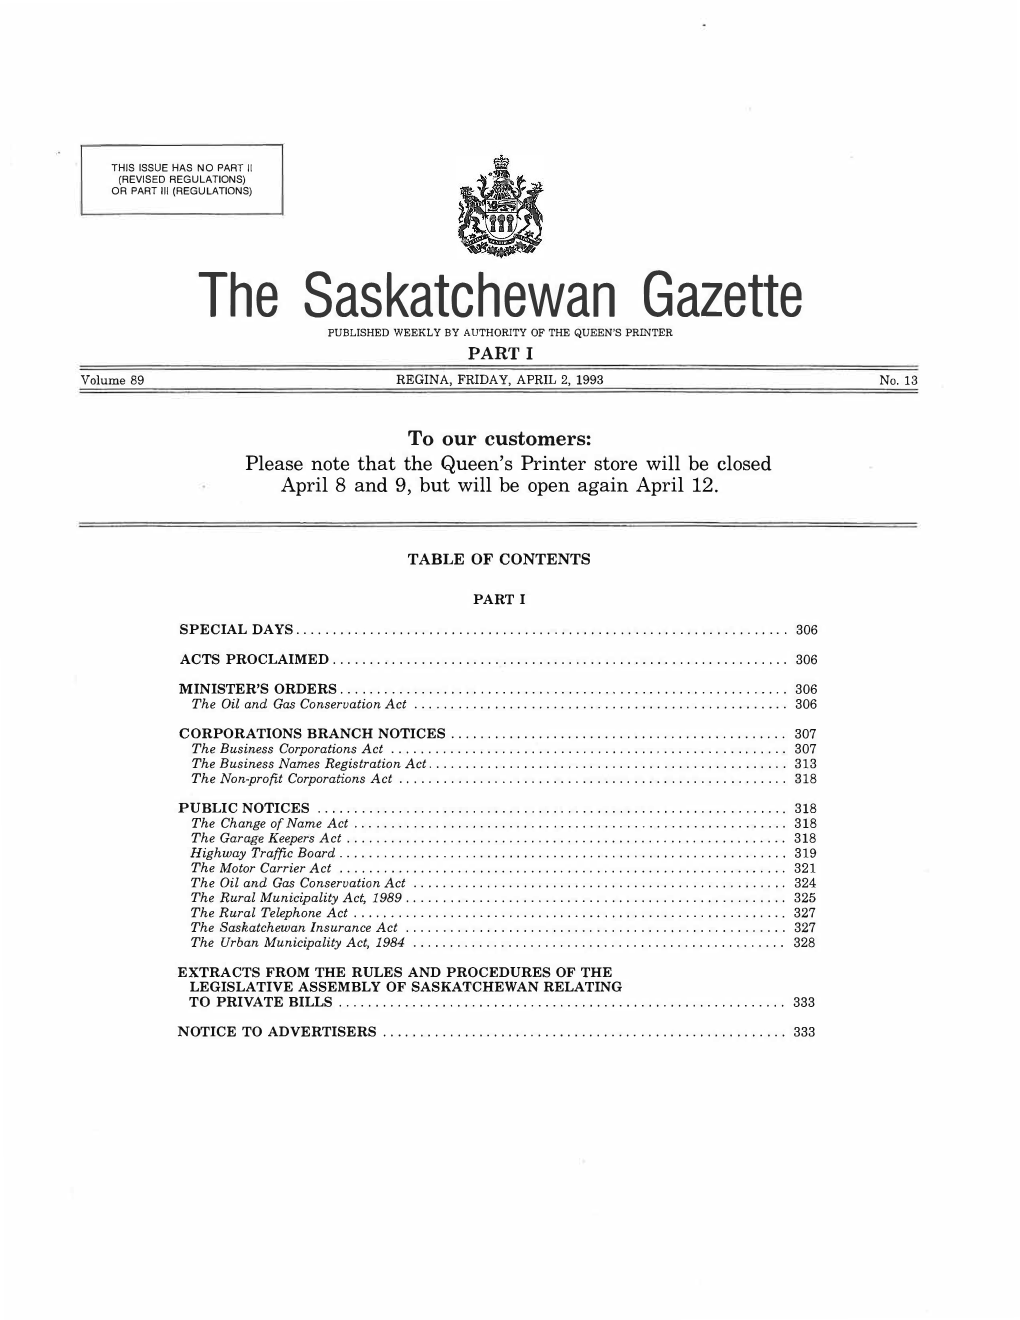 The Saskatchewan Gazette PUBLISHED WEEKLY by AUTHORITY of the QUEEN's Prlnter PART I Volume 89 REGINA, FRIDAY, APRIL 2, 1993 No